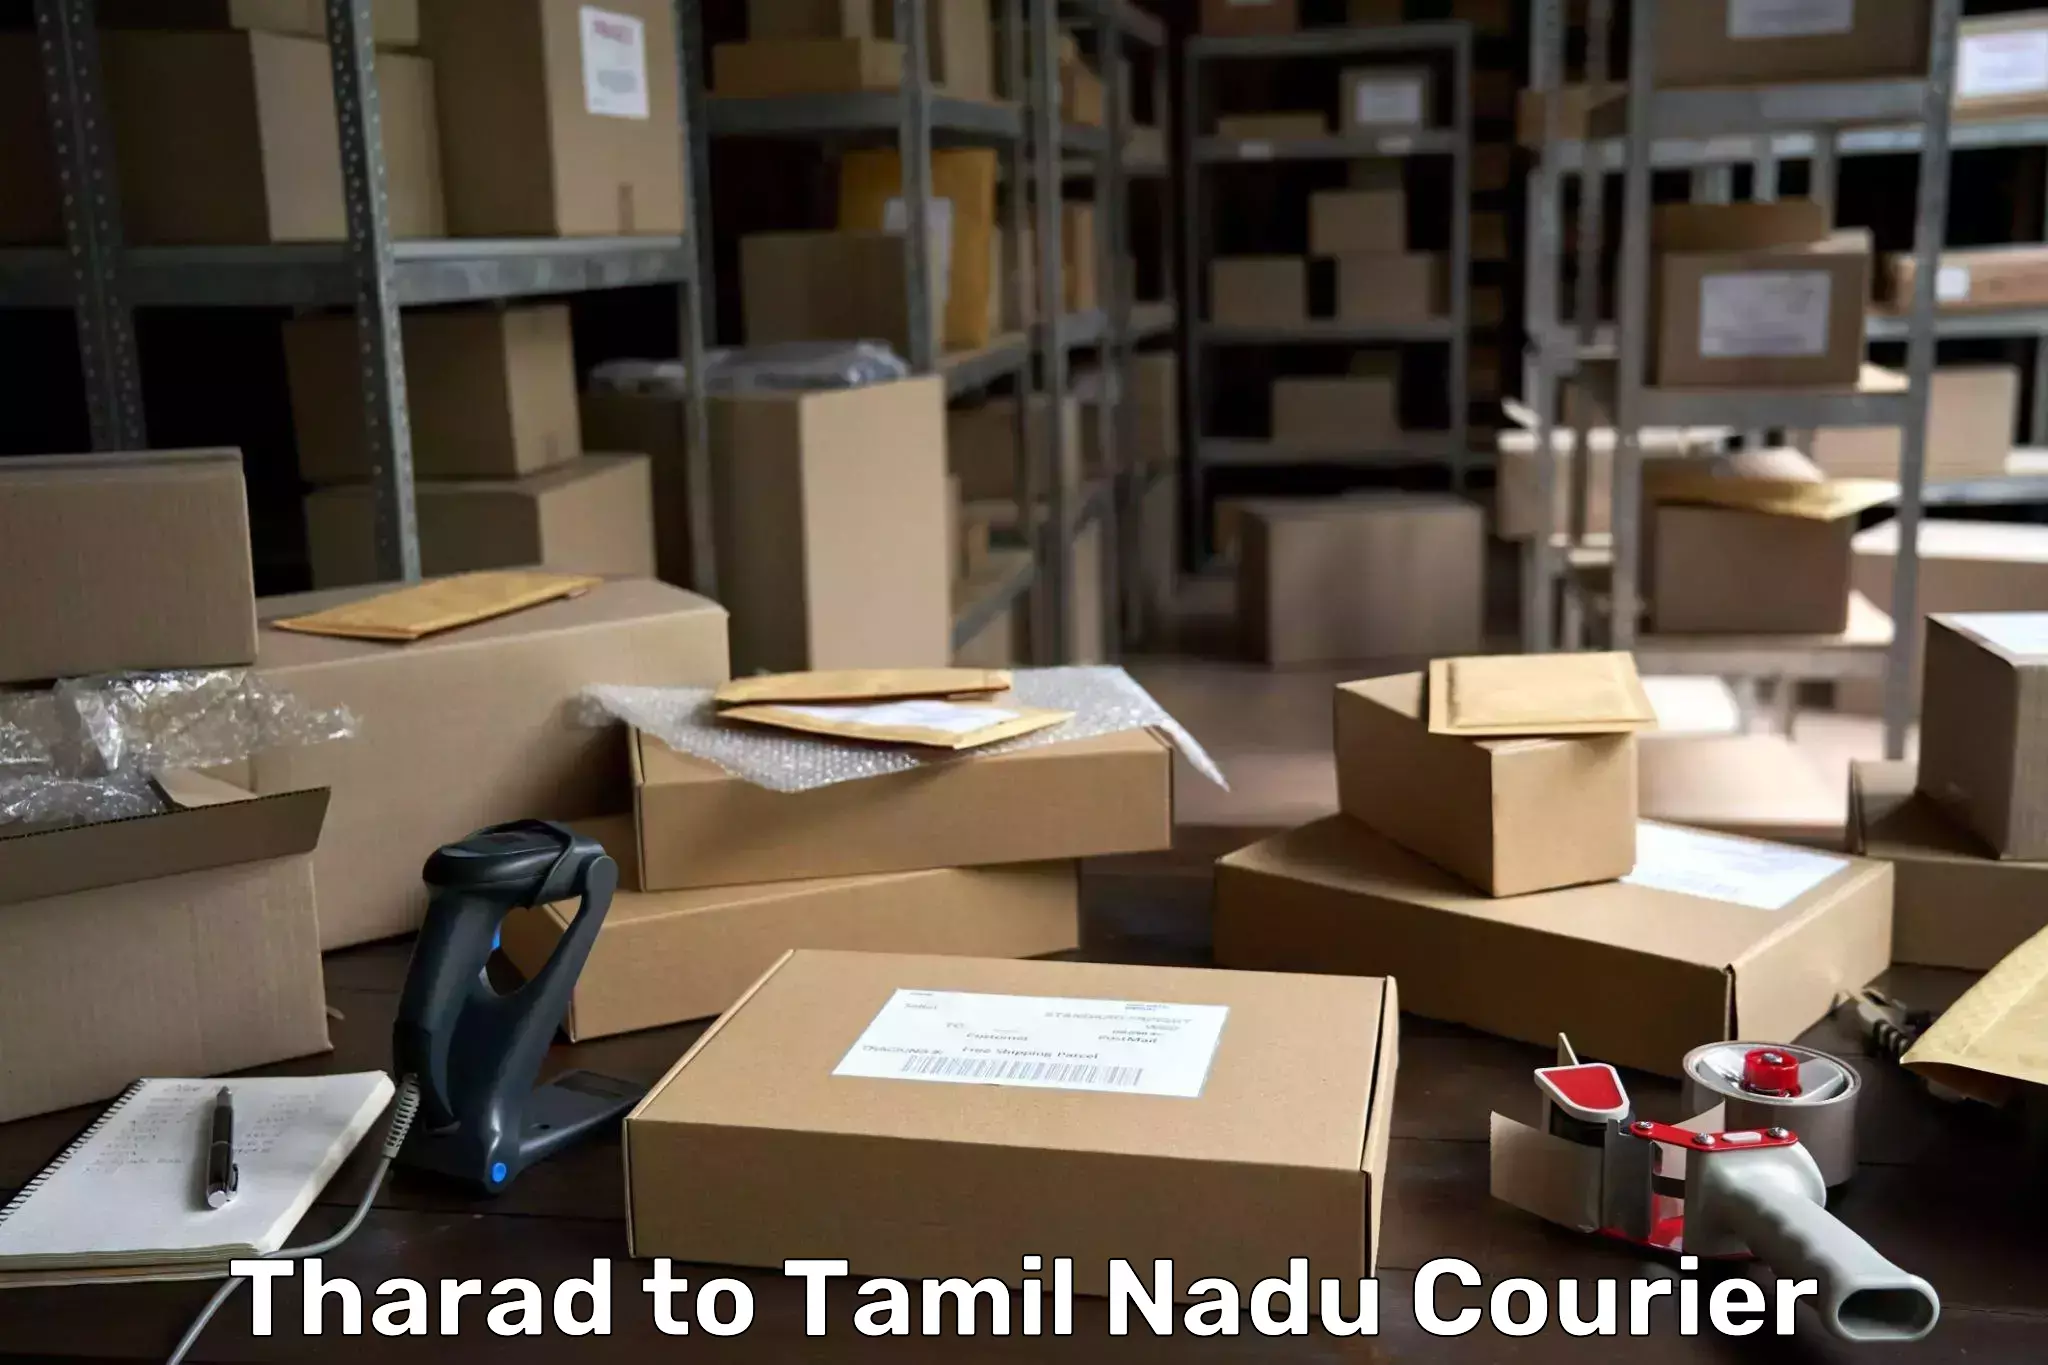 Subscription-based courier Tharad to Tamil Nadu